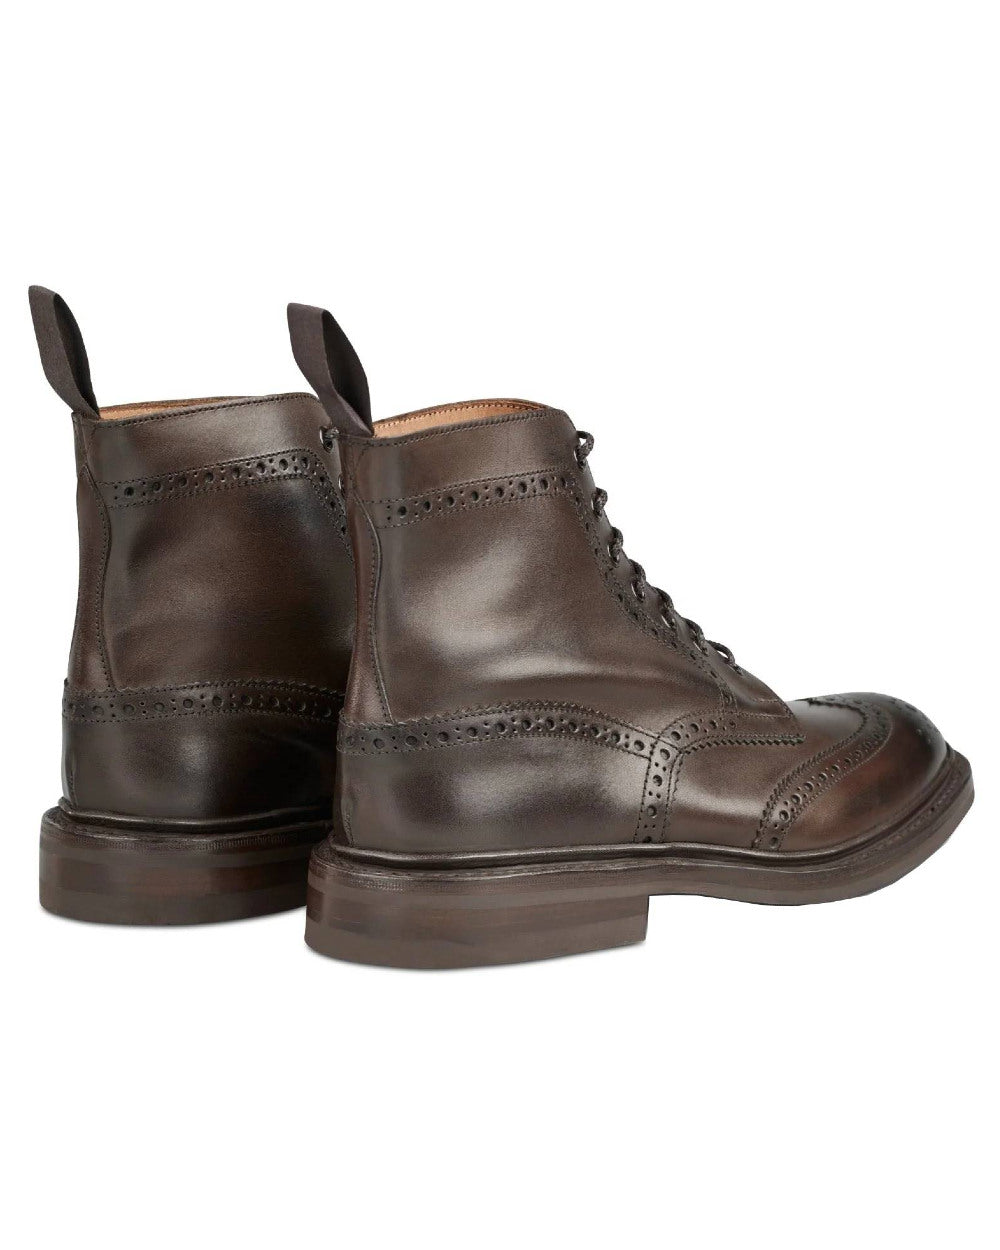 Espresso Burnished Coloured Trickers Stow Leather Sole Country Boot On A White Background 